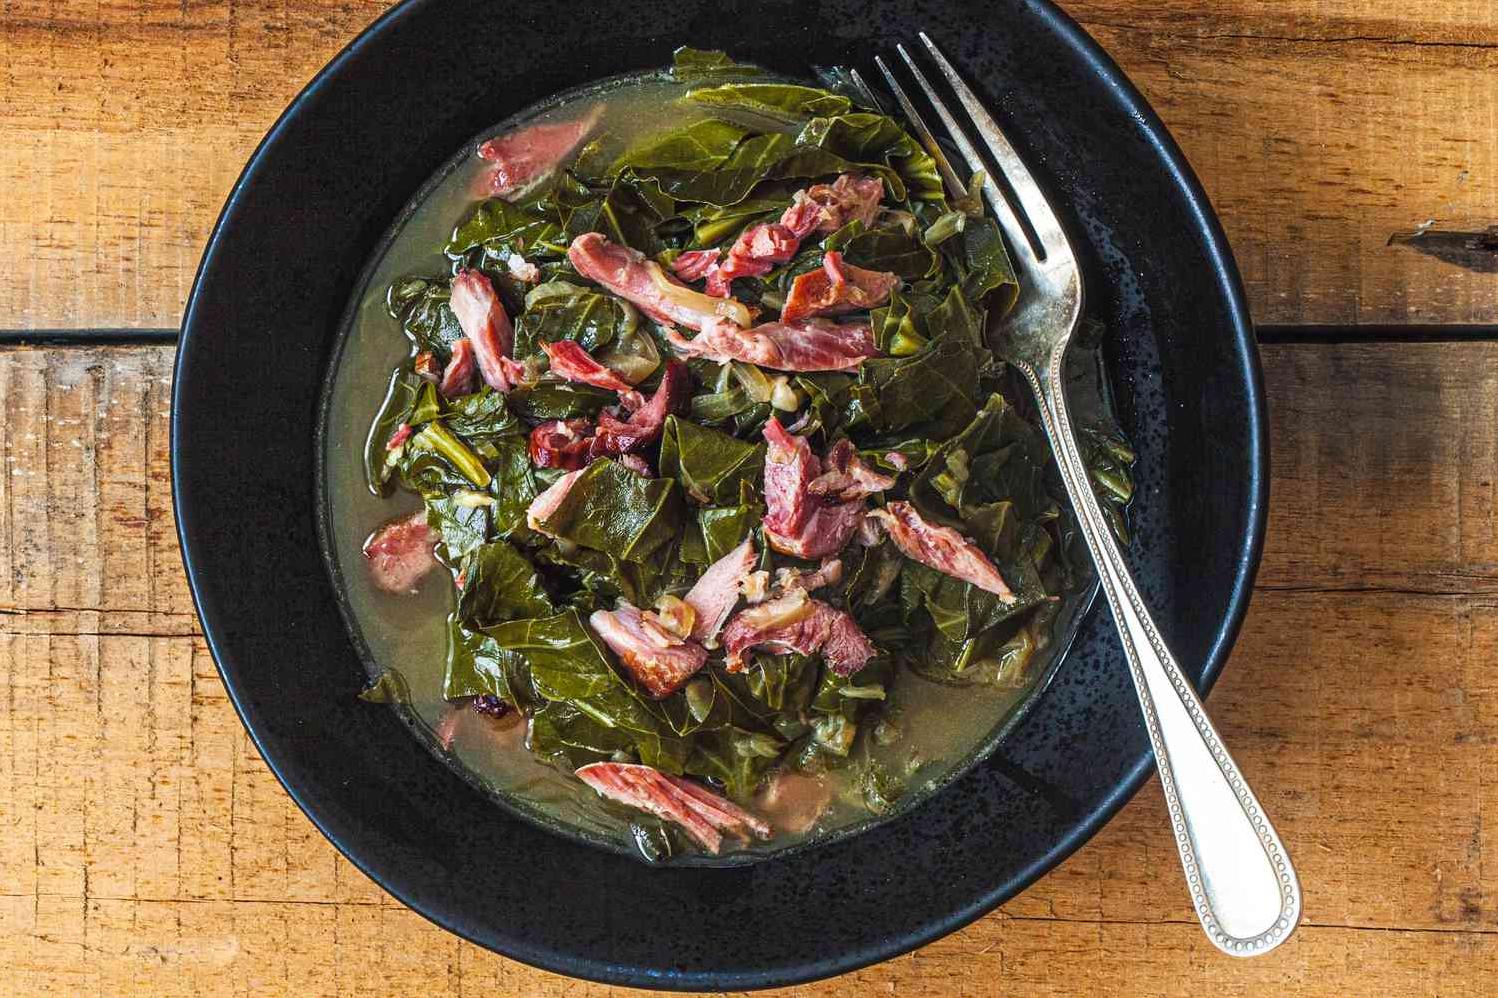  Pair these greens with some cornbread and hot sauce for a true southern experience.